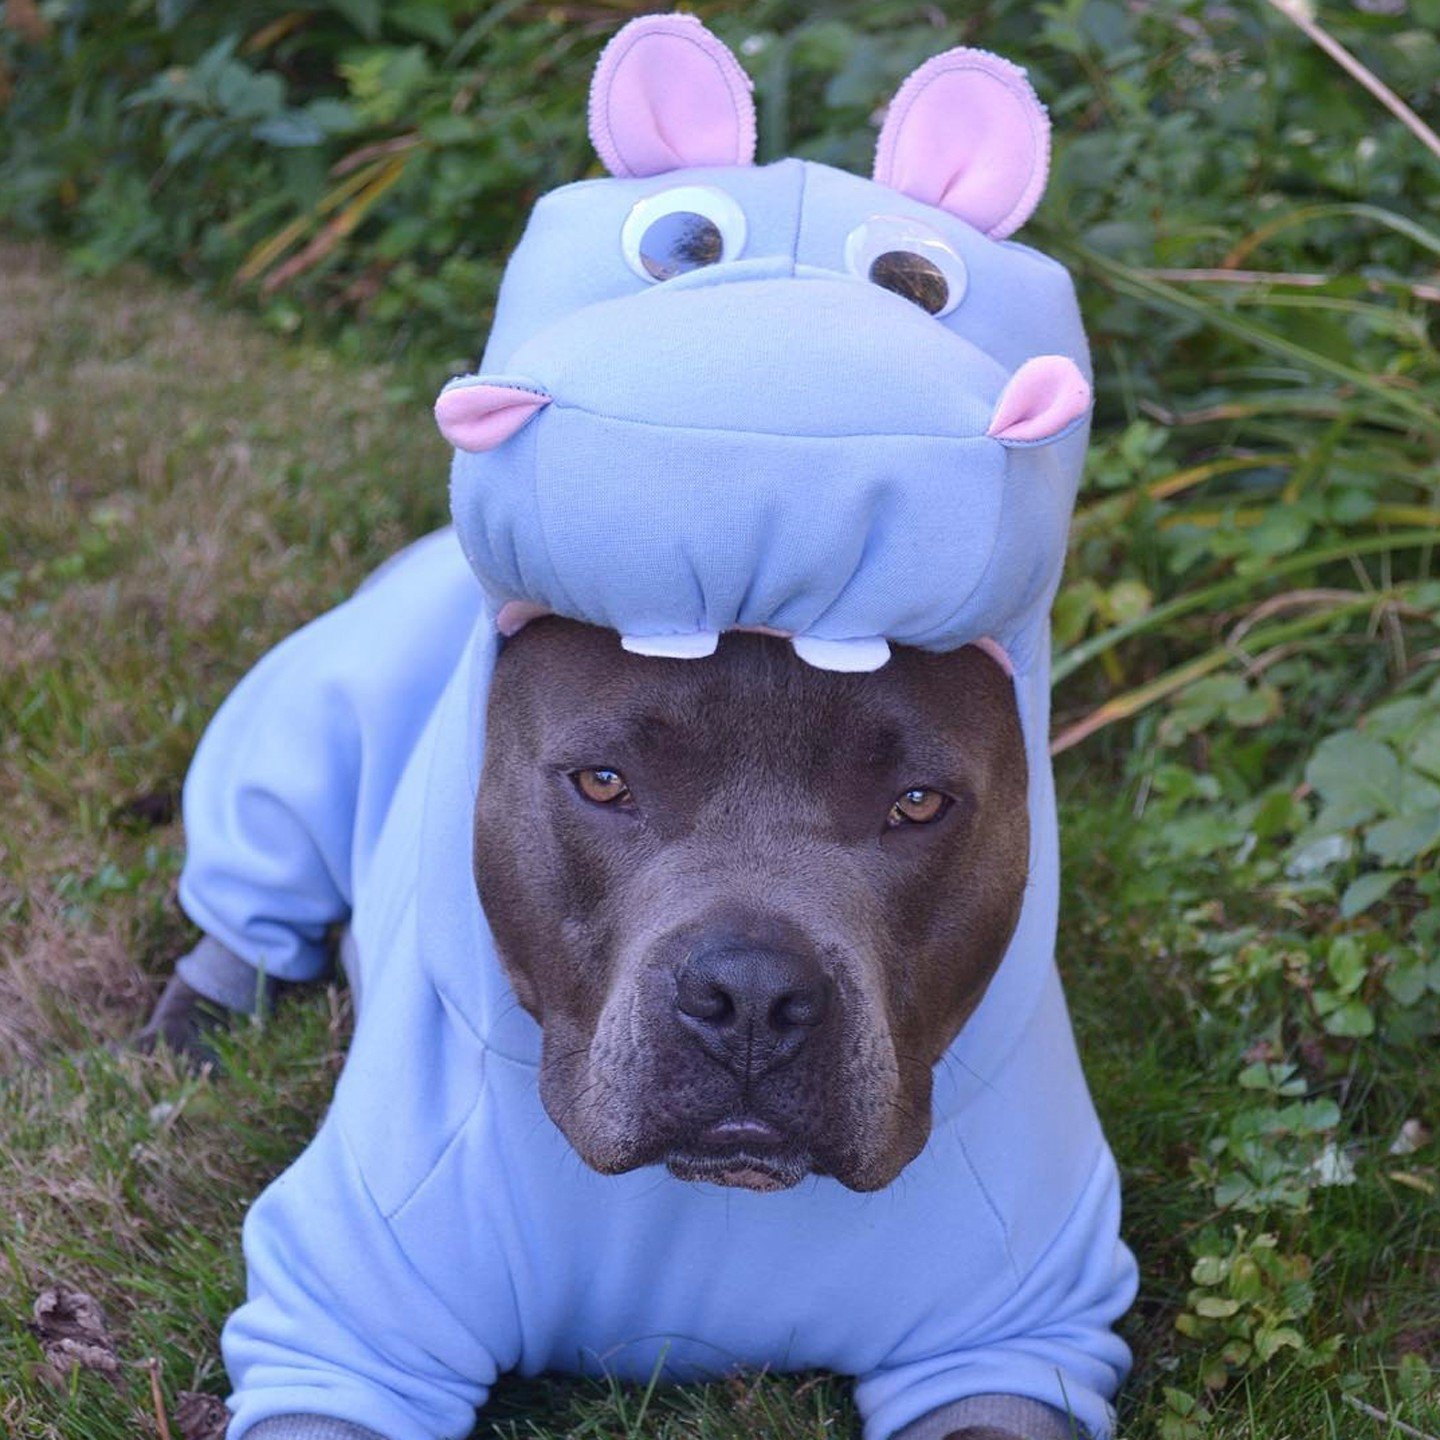 A Pit Bull in Hippopotamus costume while lying on the grass in the garden